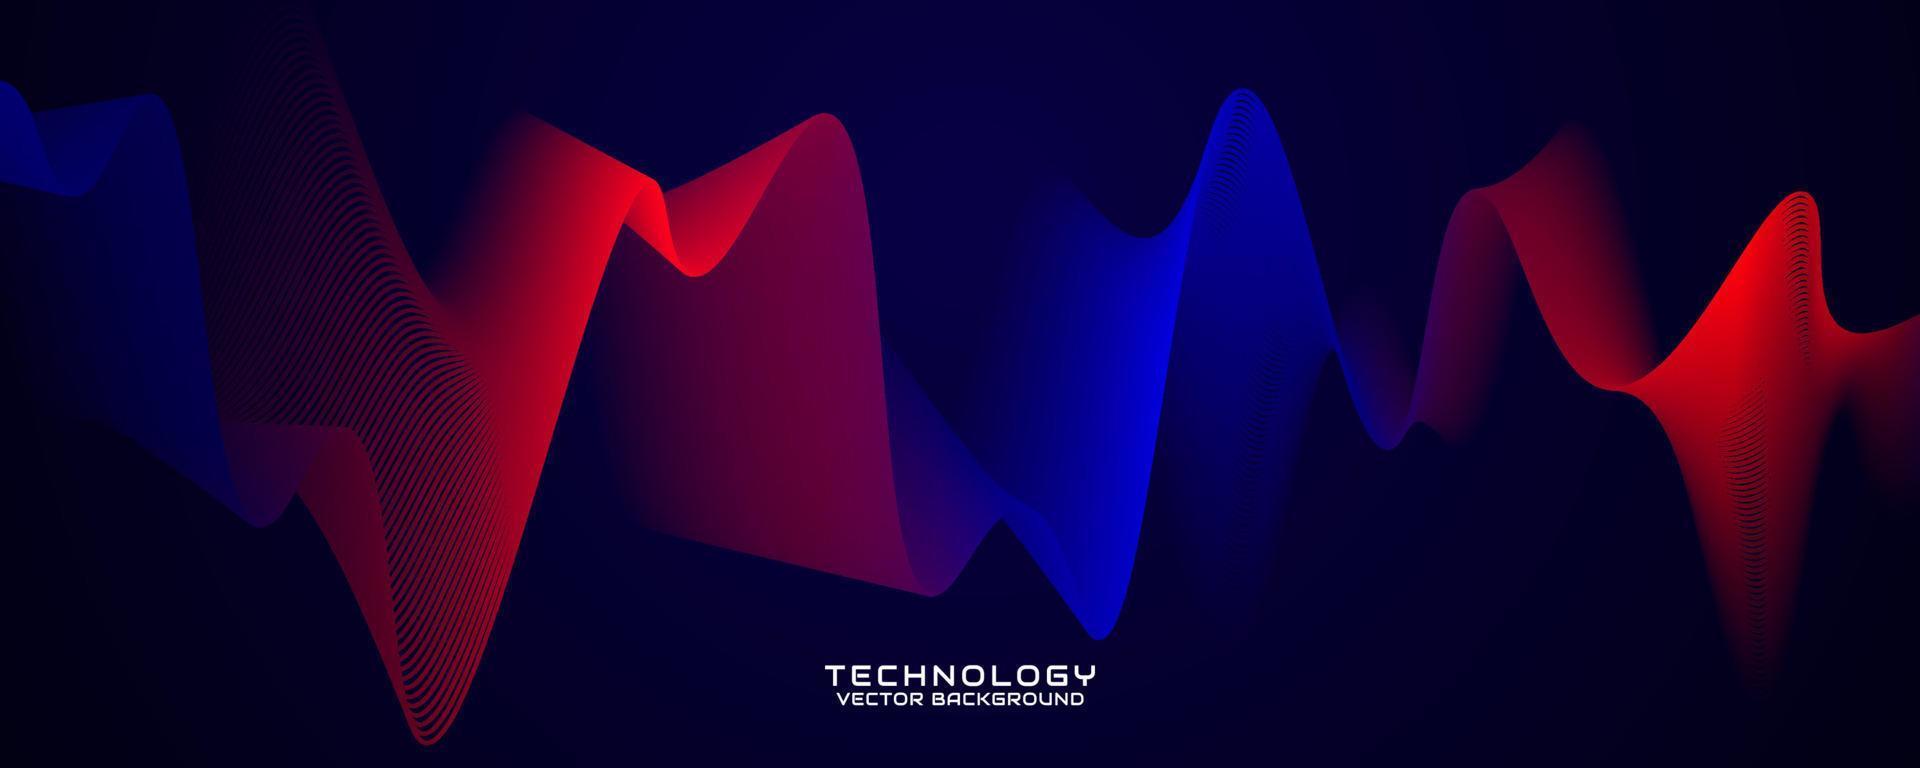 3D red blue techno abstract background overlap layer on dark space with glowing waves concept decoration. Modern graphic design element dynamic wavy style for banner flyer, card, or brochure cover vector